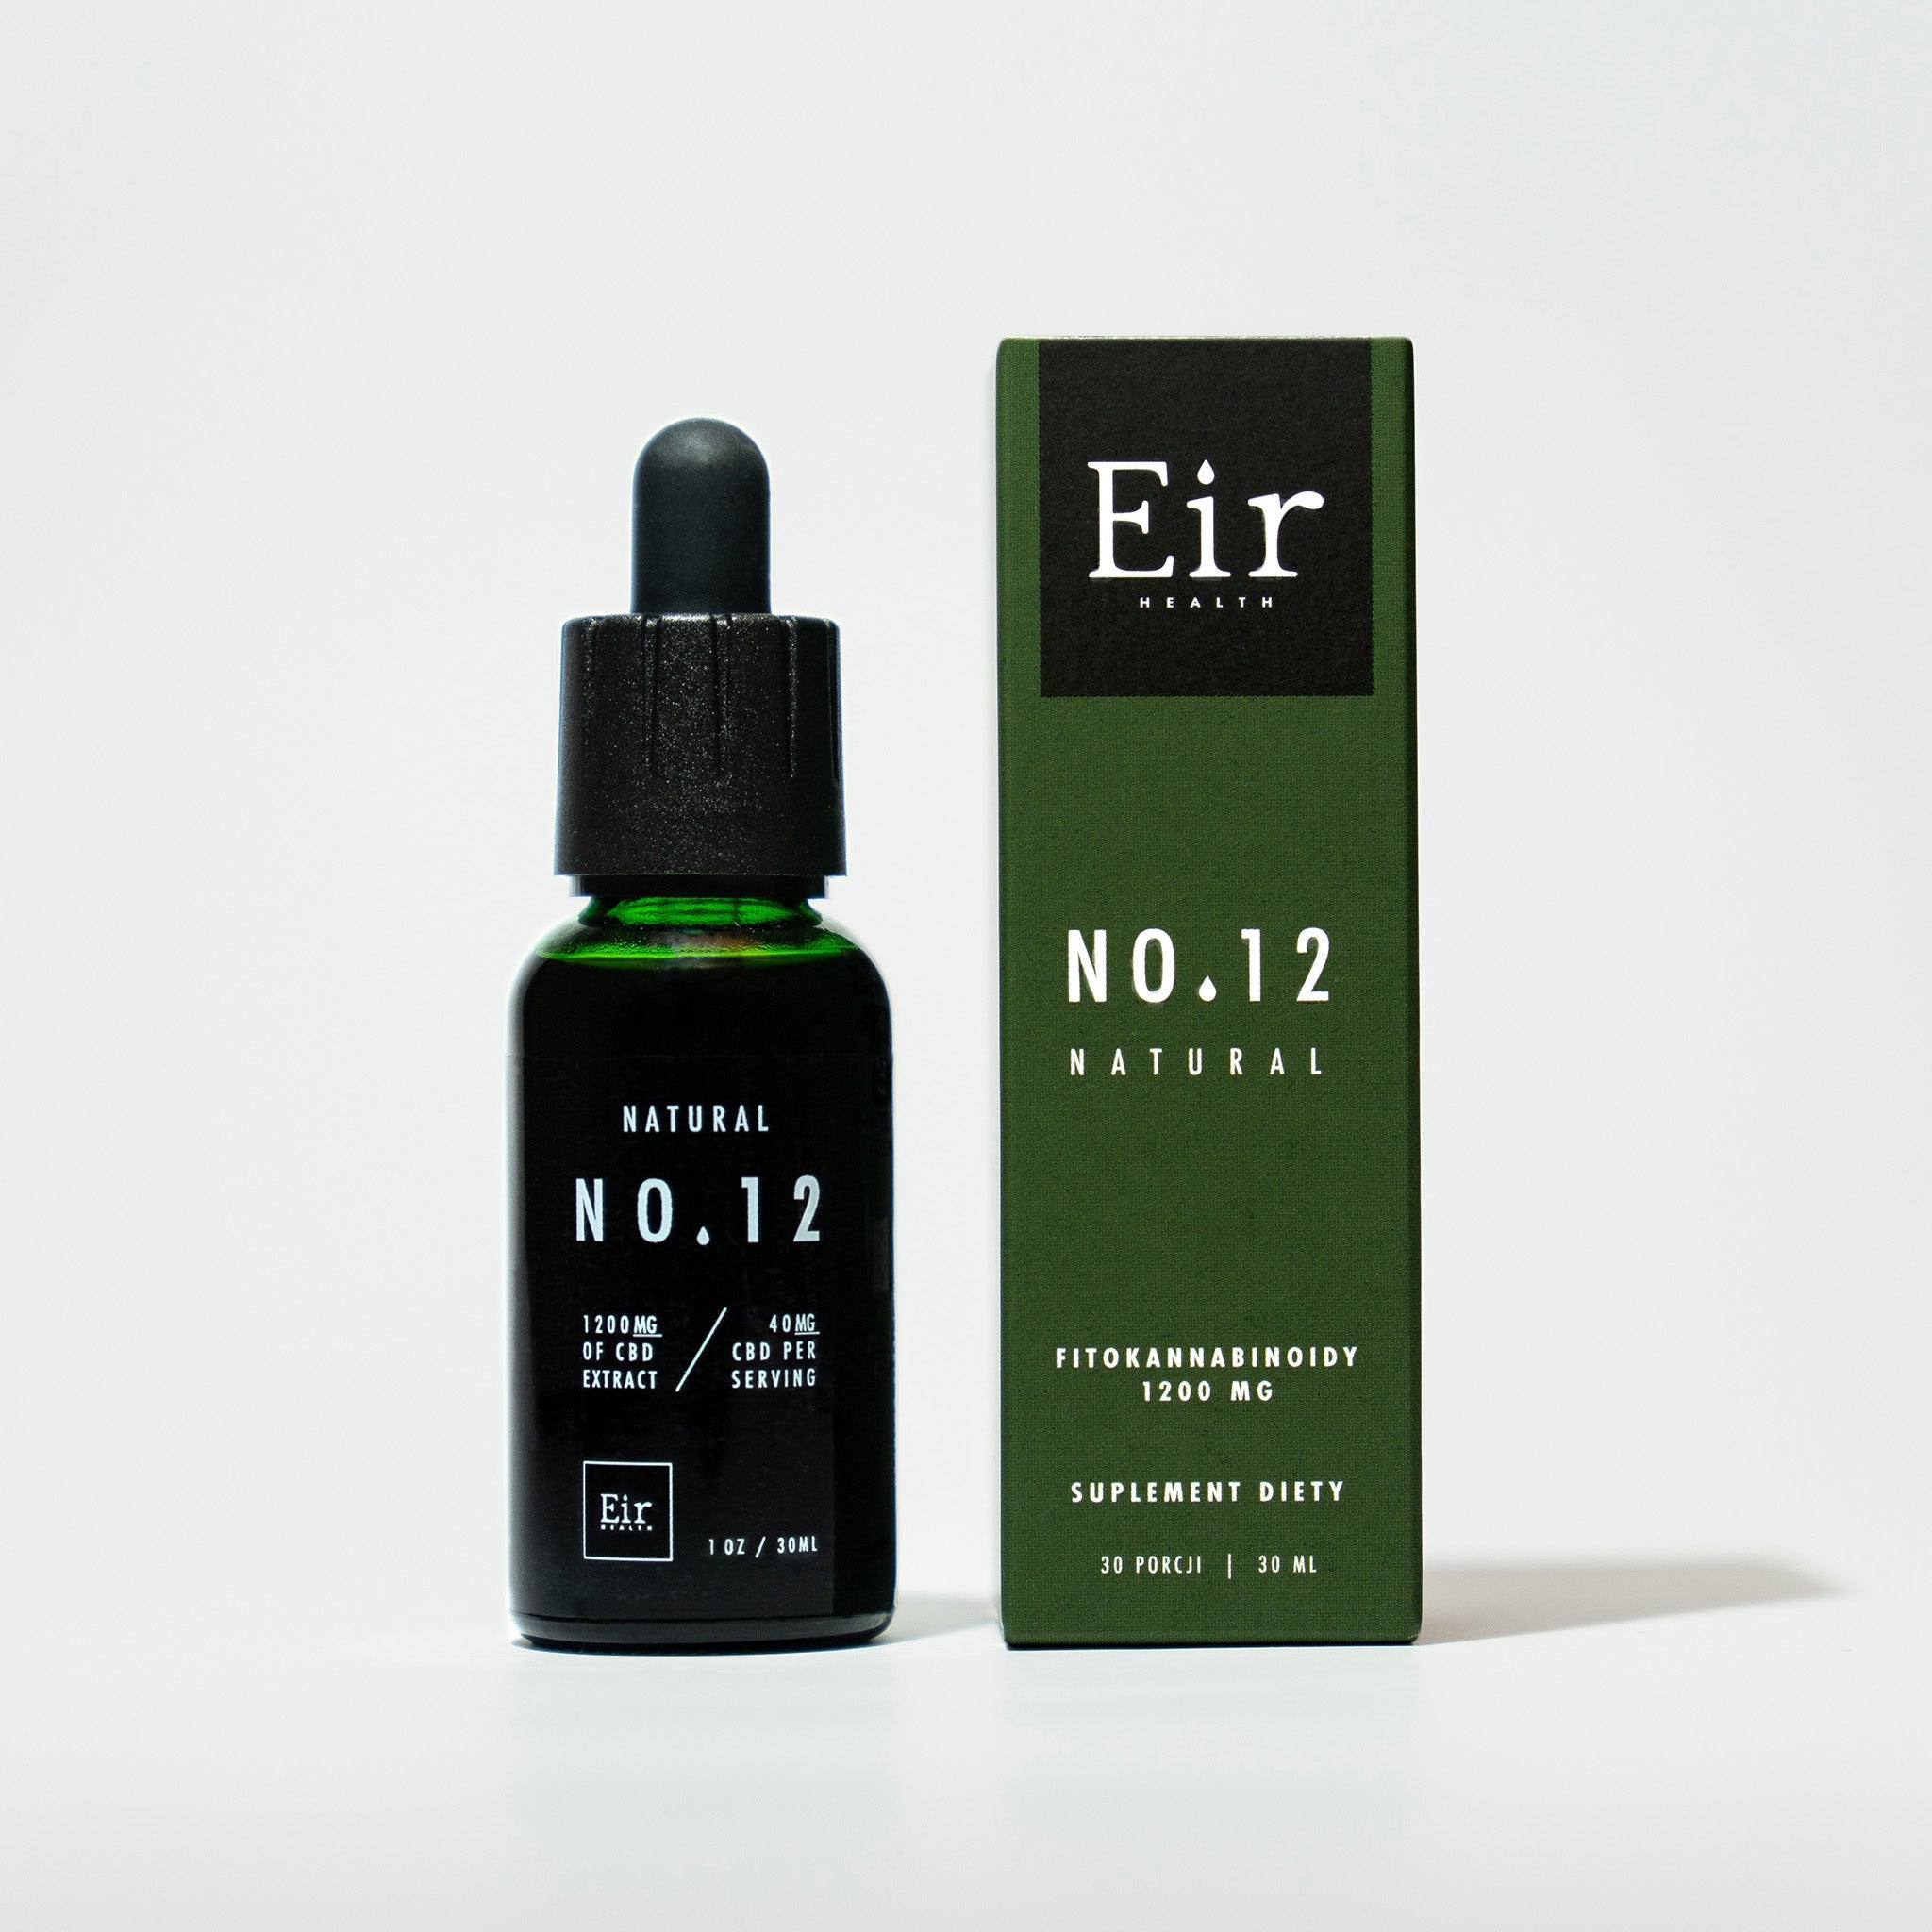 A bottle of Eir Natural No. 12 green CBD oil with a dropper, alongside a dark green package displaying information about its 1200 mg CBD content, set against a white background.